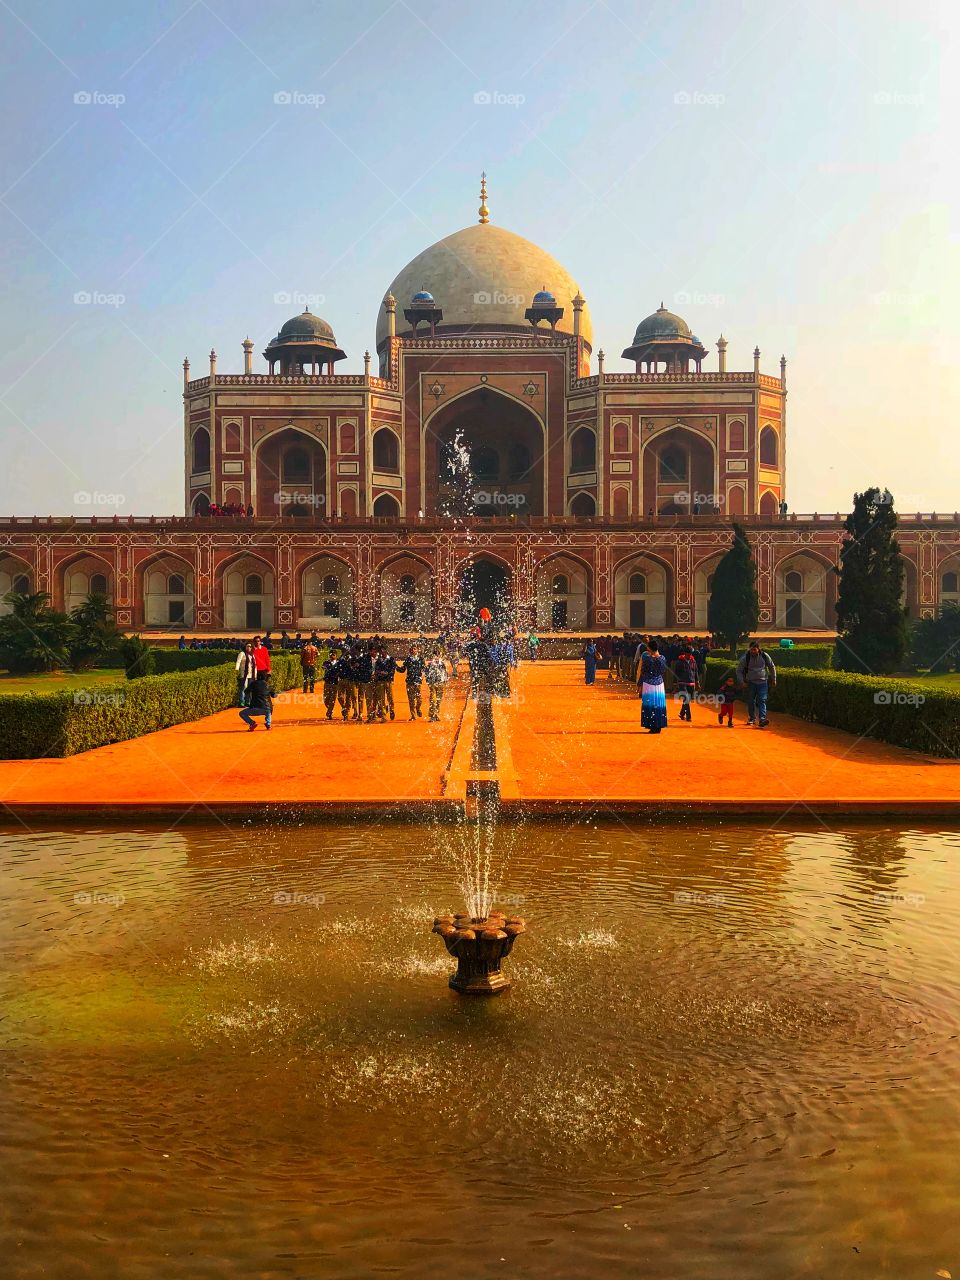 A view of Humayun’s Tomb in New Delhi, India. 